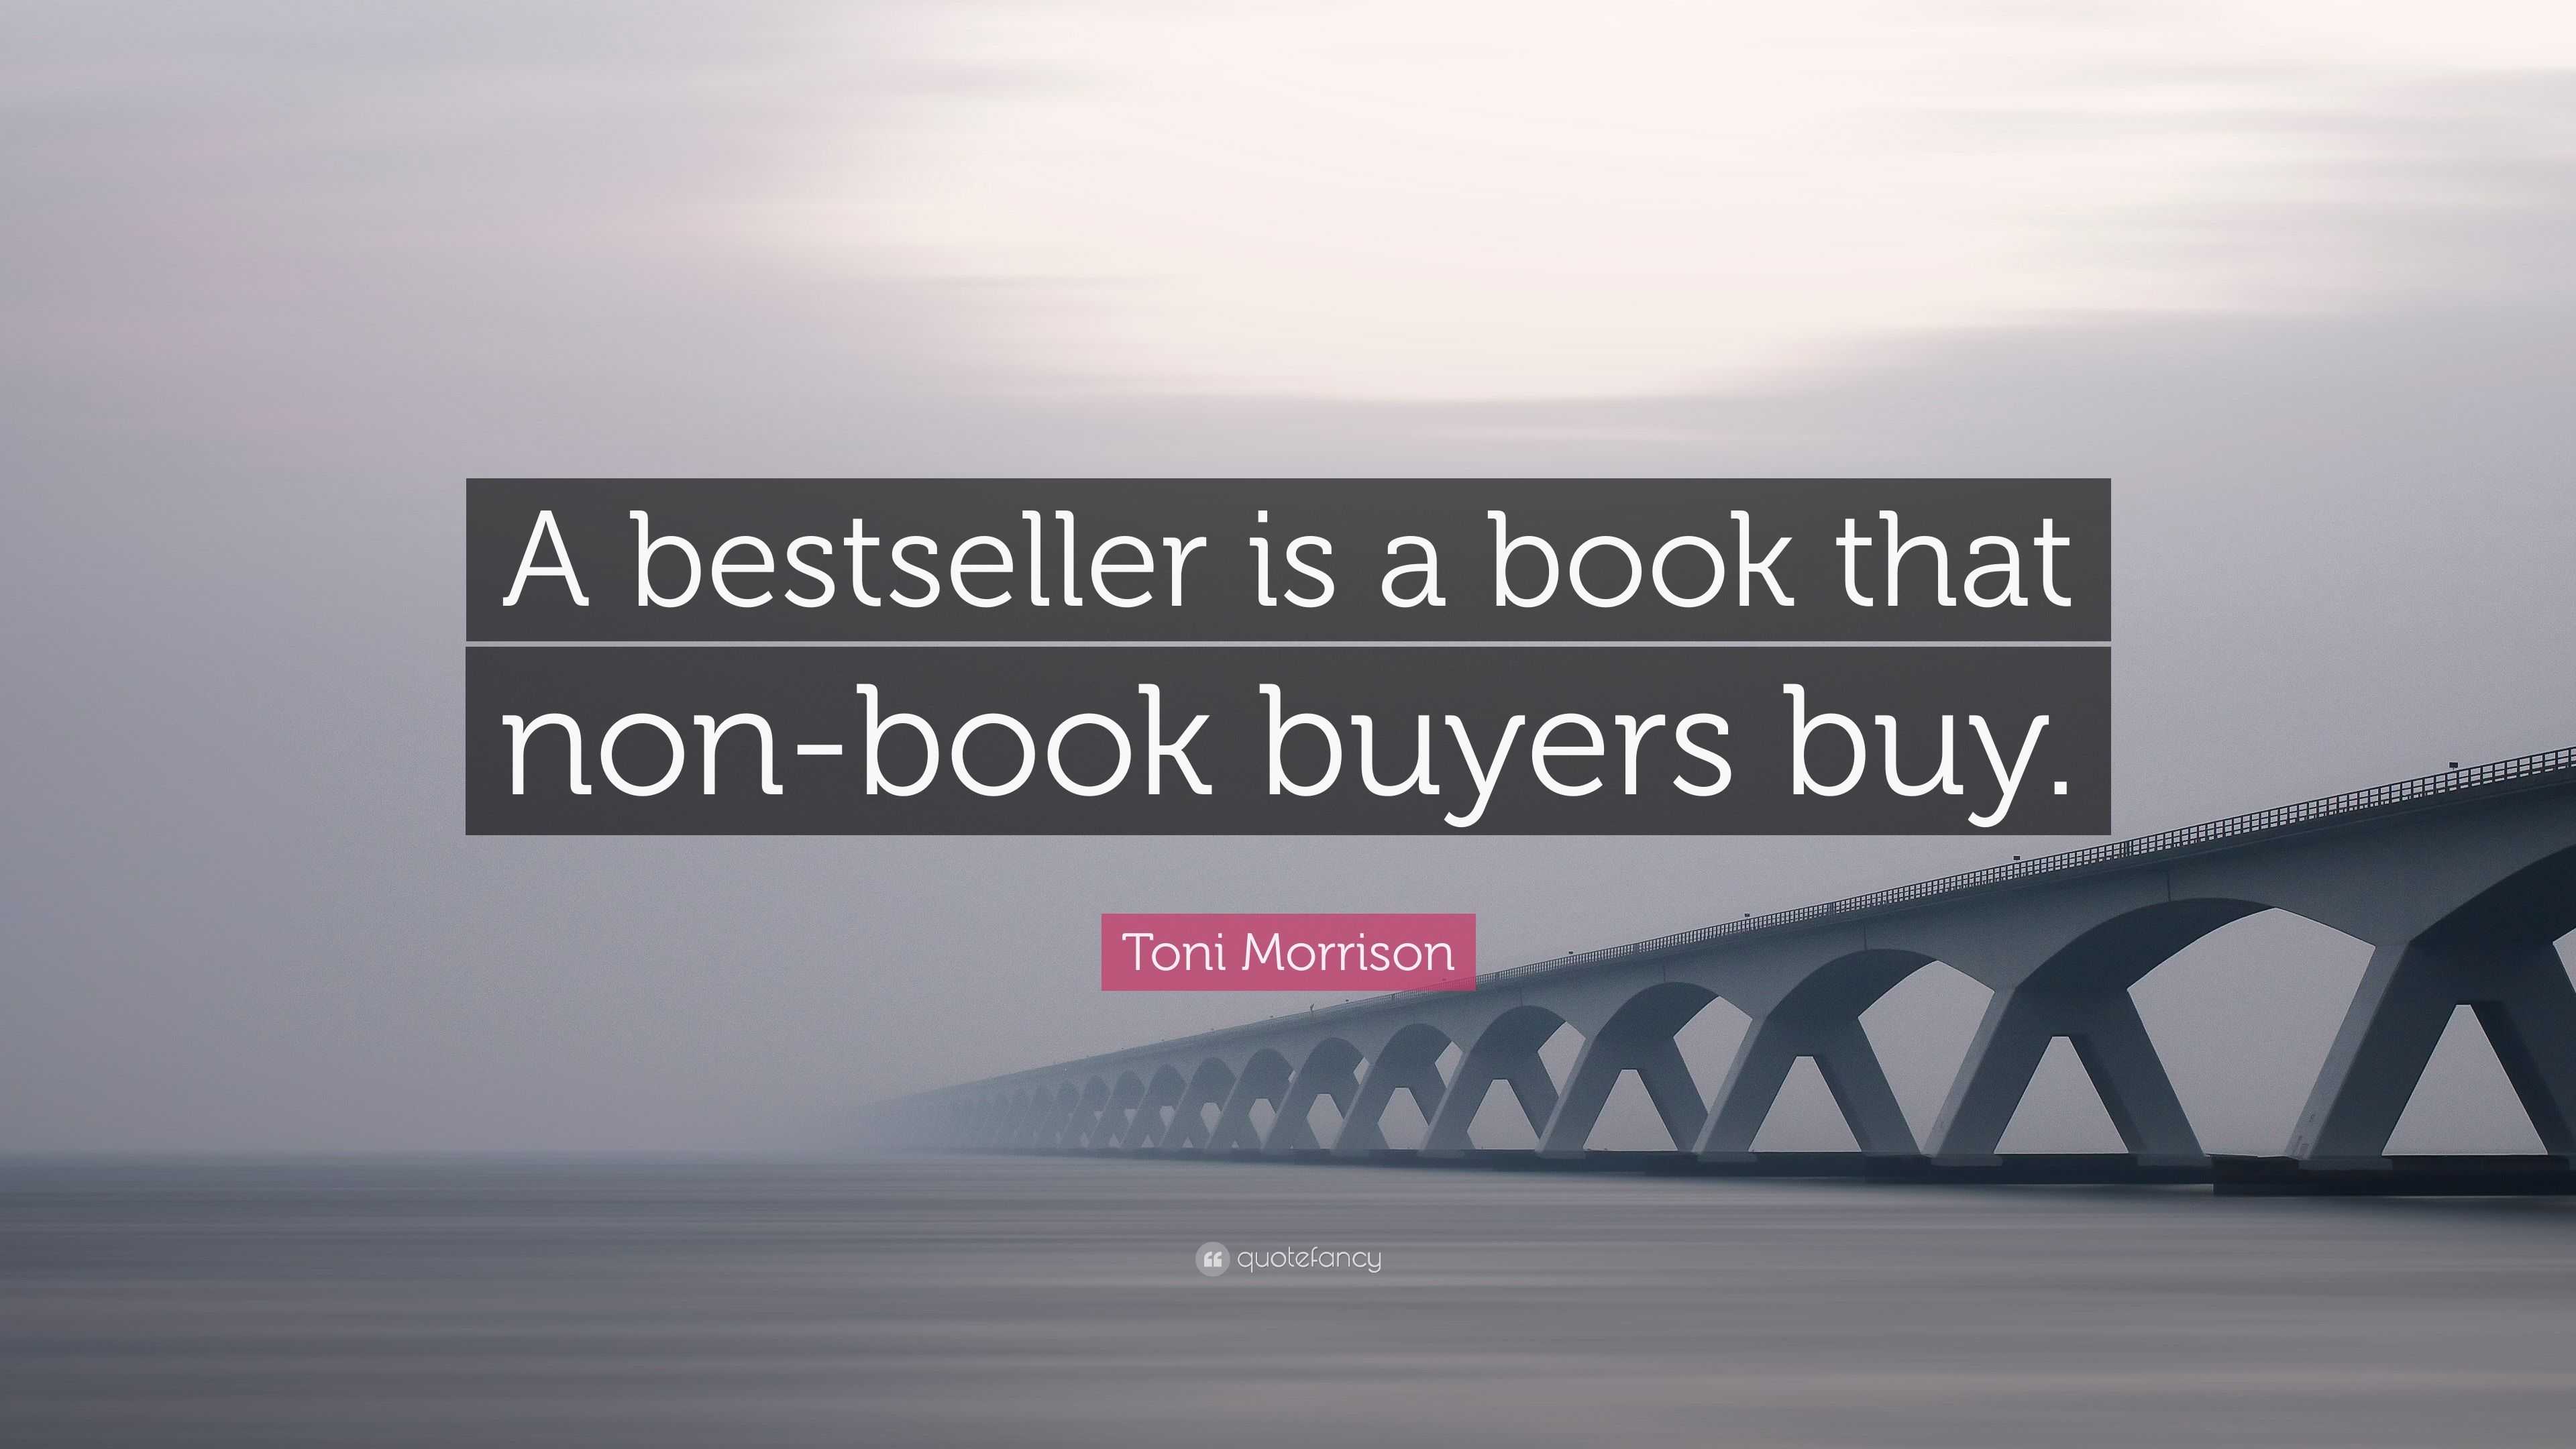 Toni Morrison Quote: “A bestseller is a book that non-book buyers buy.”